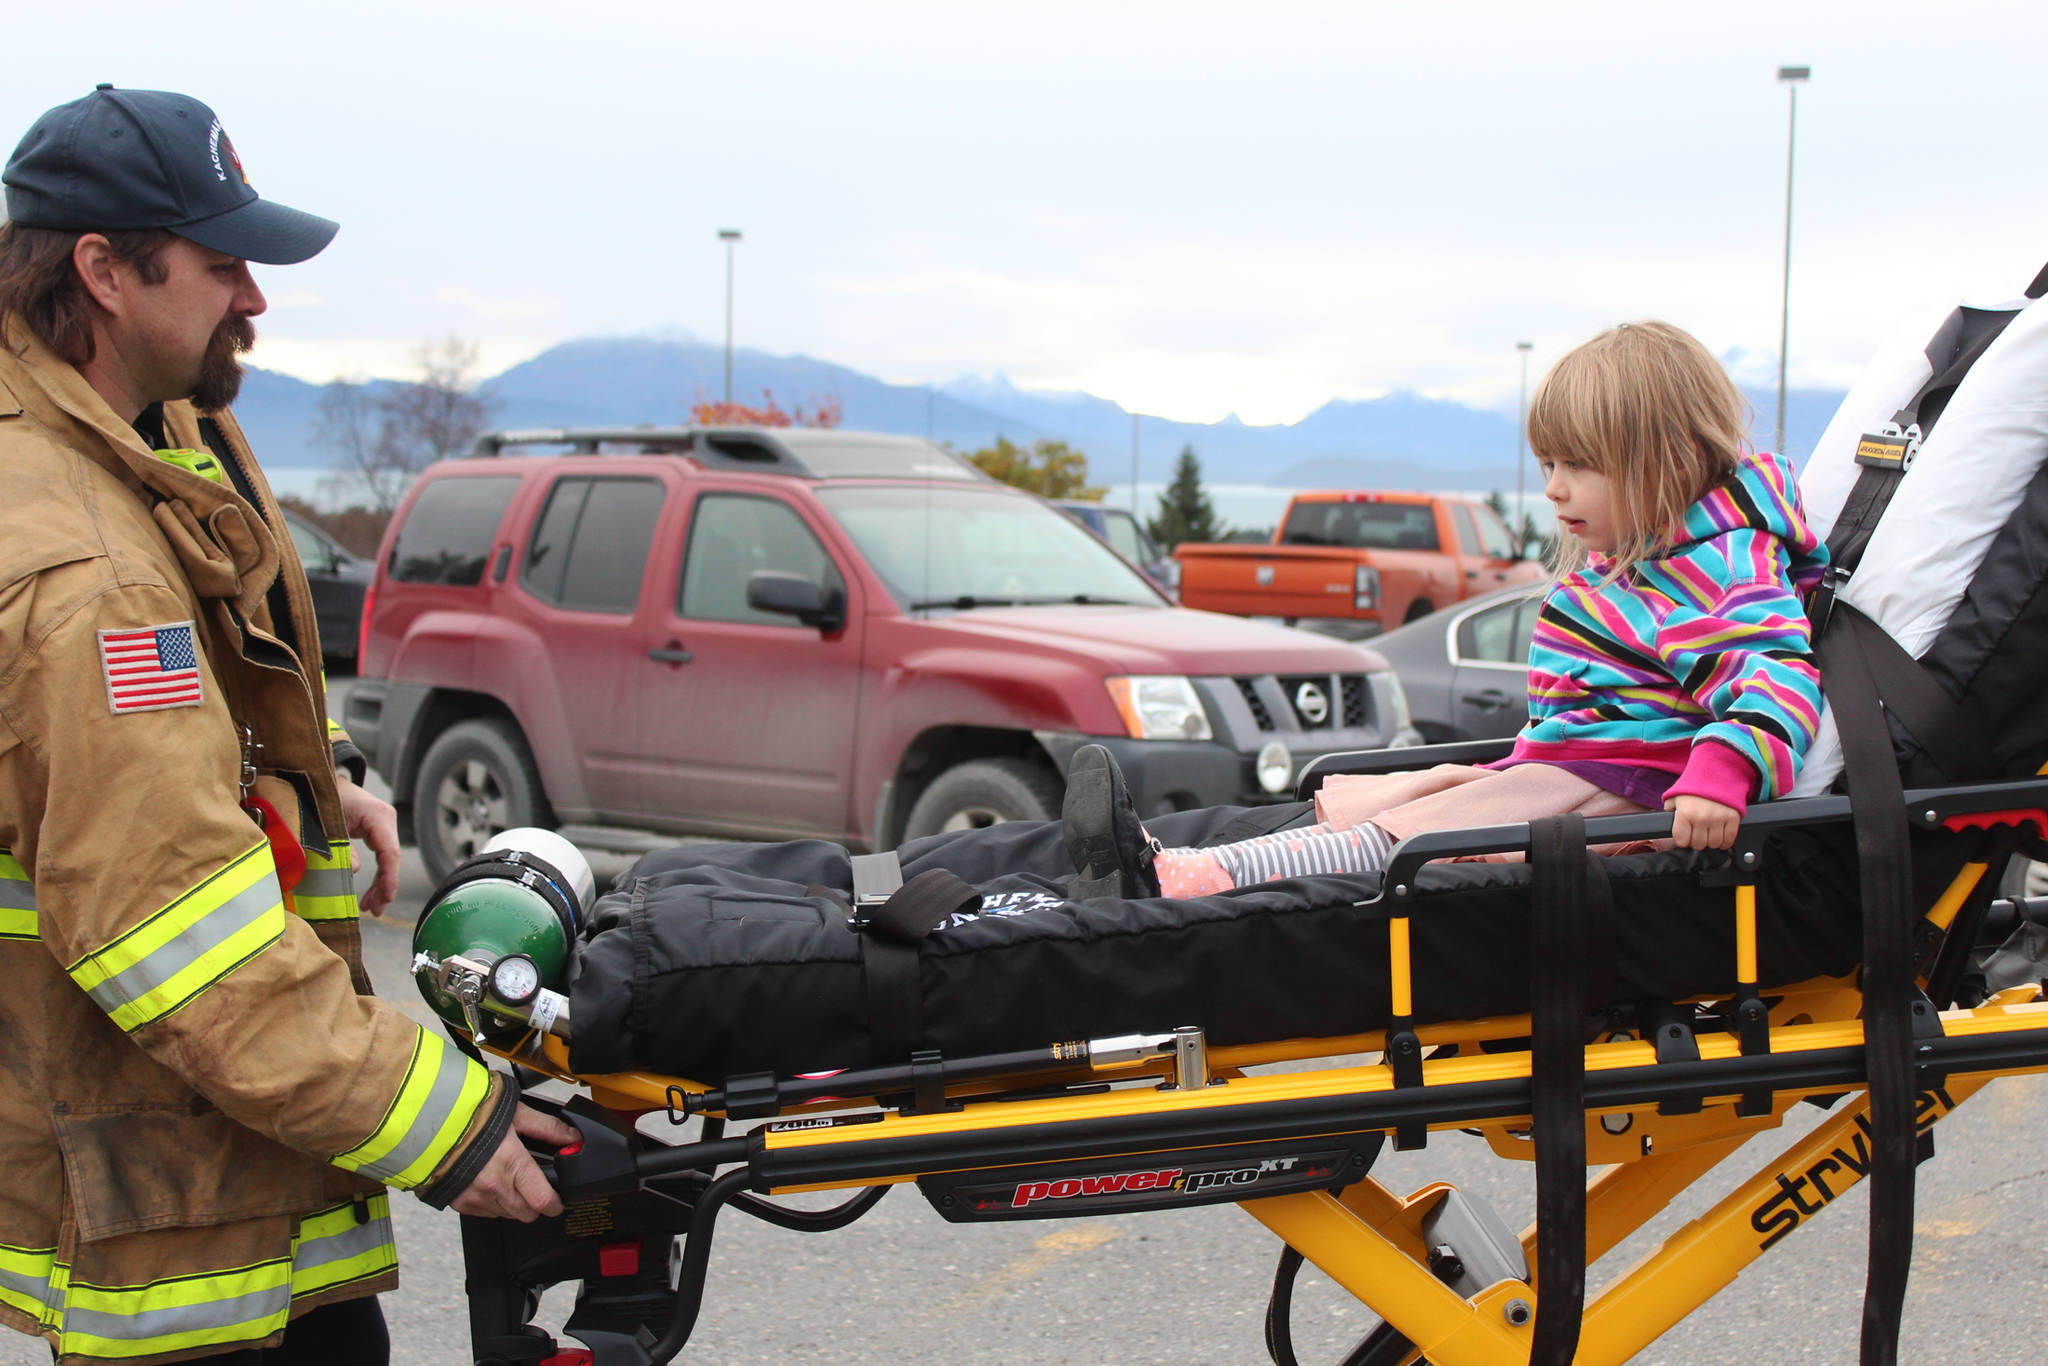 Three-year-old Lenore Jones experiences what a ride on a stretcher is like, courtesy of Jason Miller of Kachemak Emergency Services, during the annual Rotary Health Fair on Saturday, Nov. 3, 2018 held at Homer High School in Homer, Alaska. (Photo by Megan Pacer/Homer News)